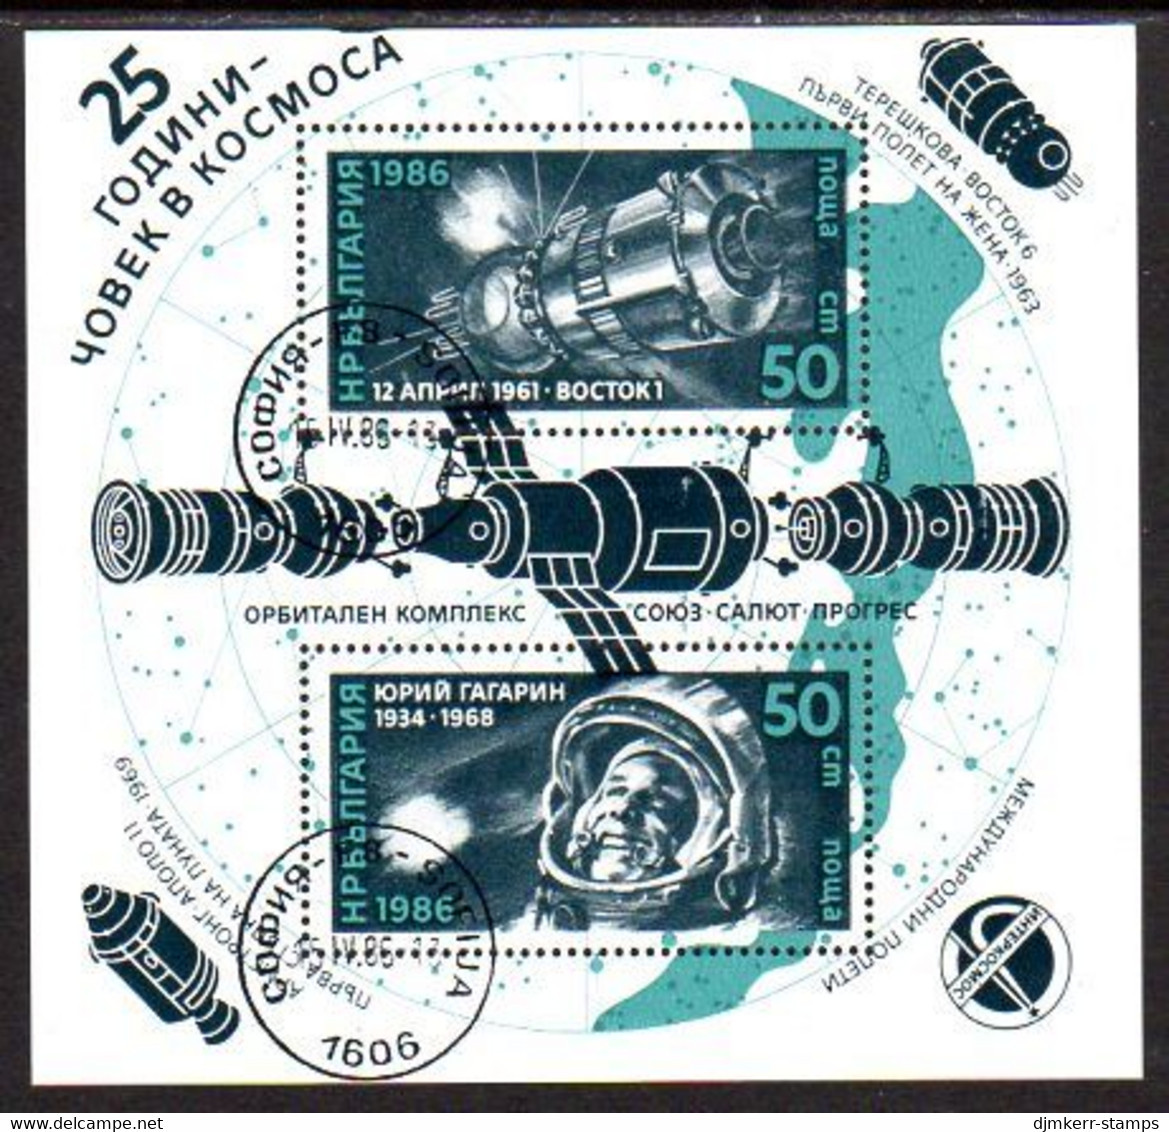 BULGARIA 1986 Manned Space Flight Anniversary Perforated Block Used.  Michel Block 164A - Blocs-feuillets